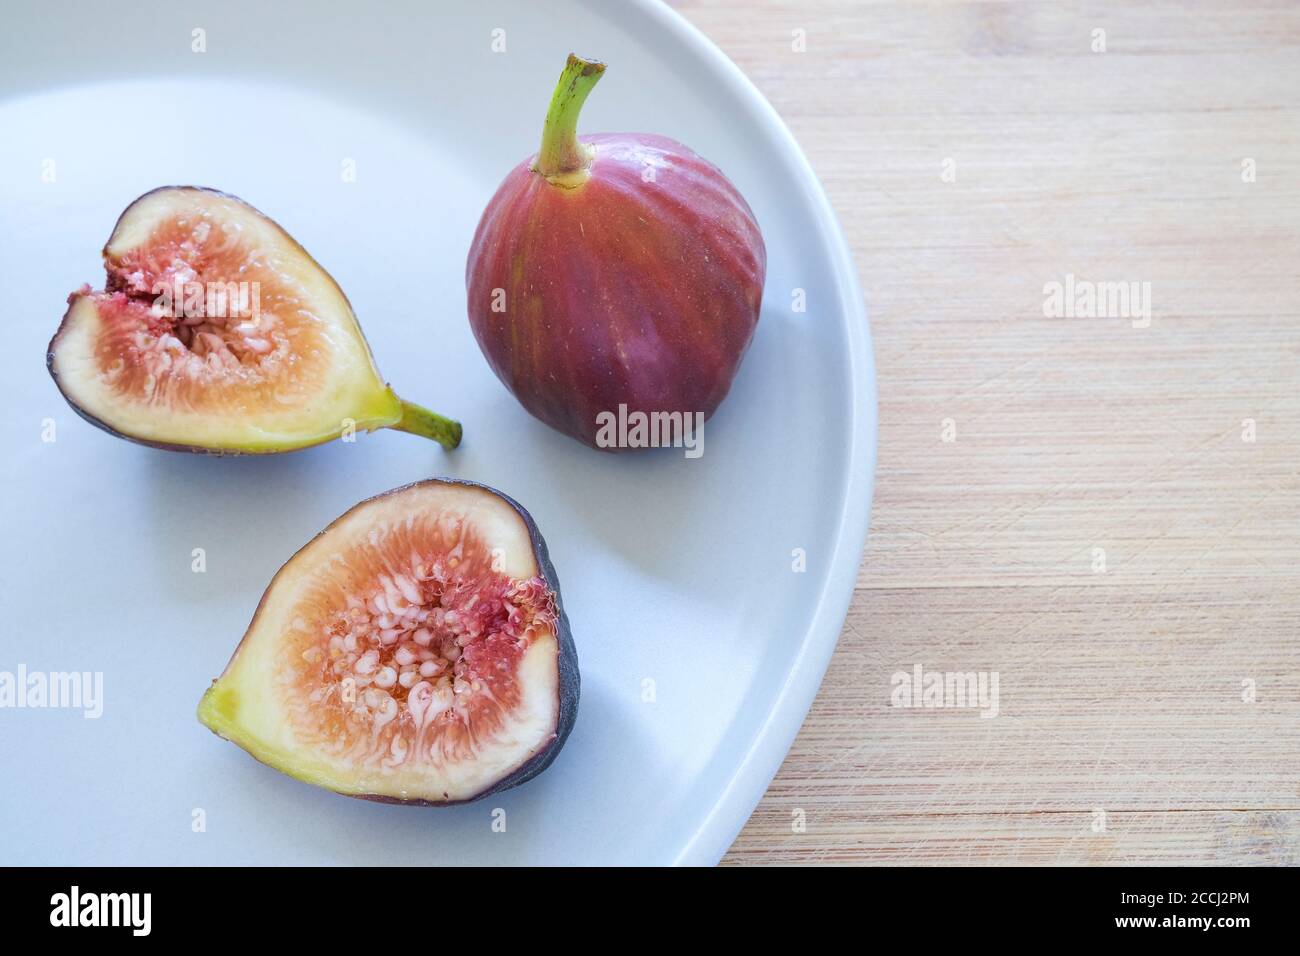 Common figs, Ficus carica , on a plate Stock Photo